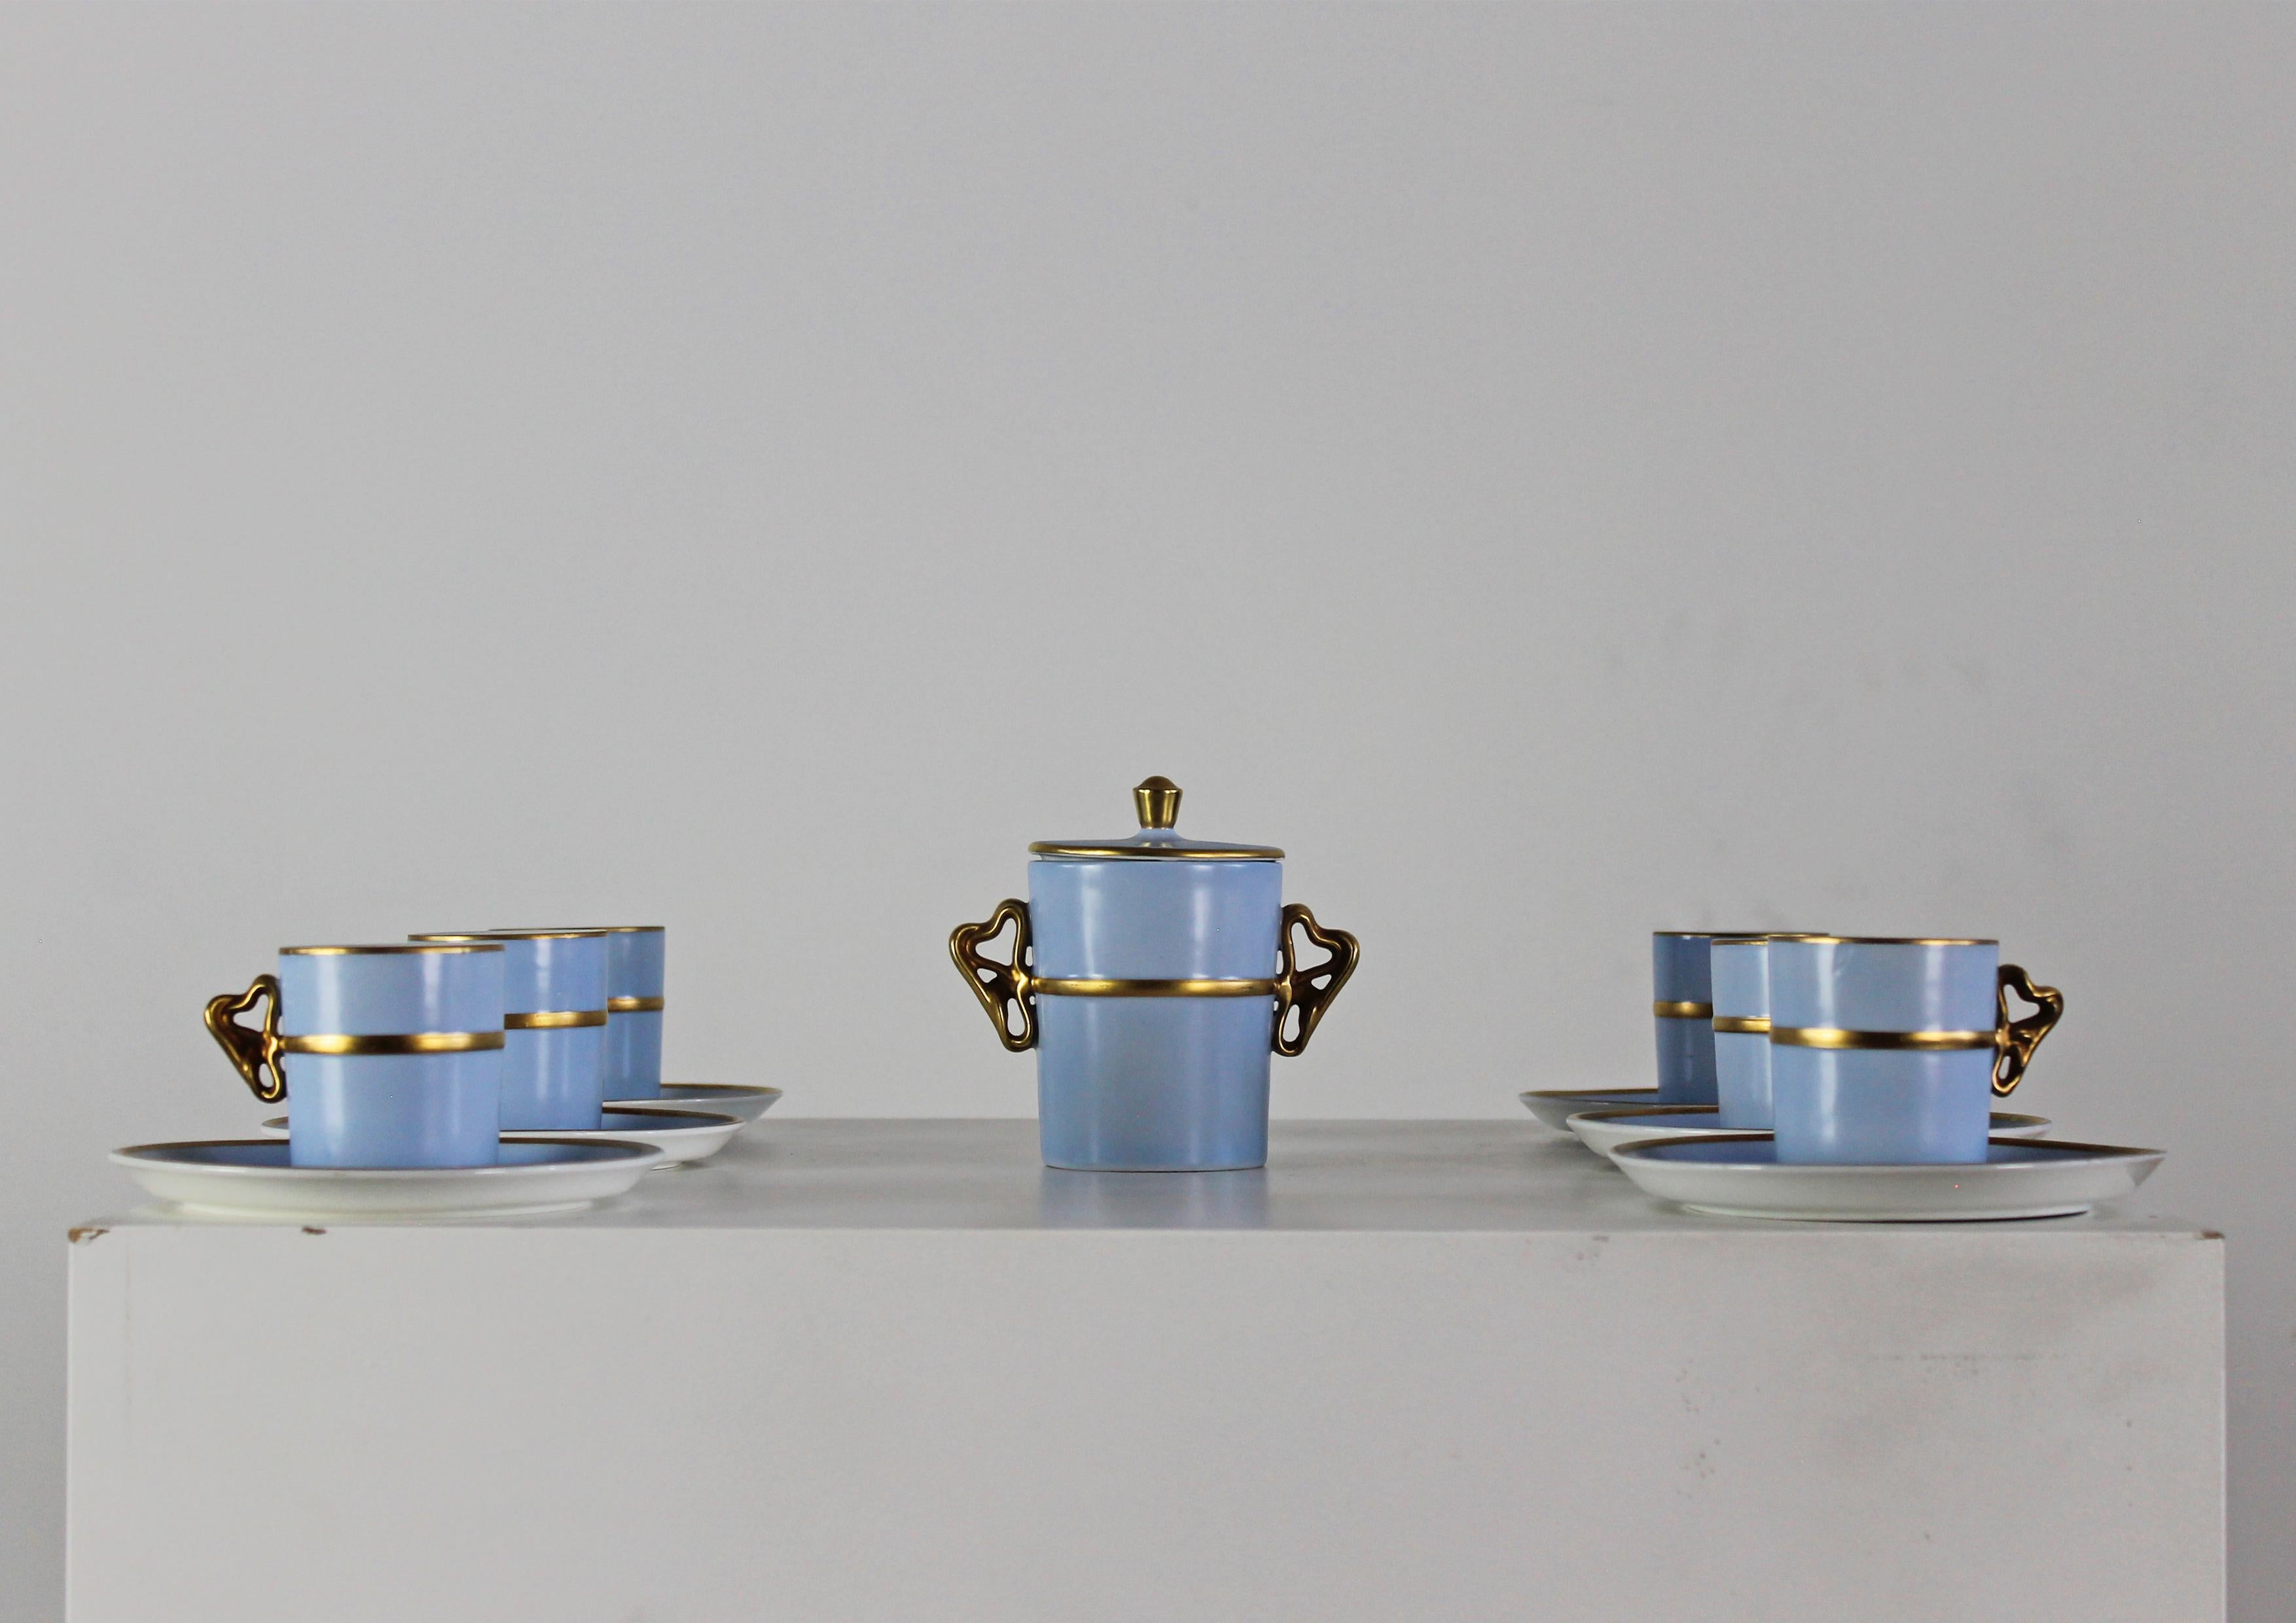 Italian Antonia Campi Tea Service for Six in Porcelain and Gold by Laveno 1950s For Sale